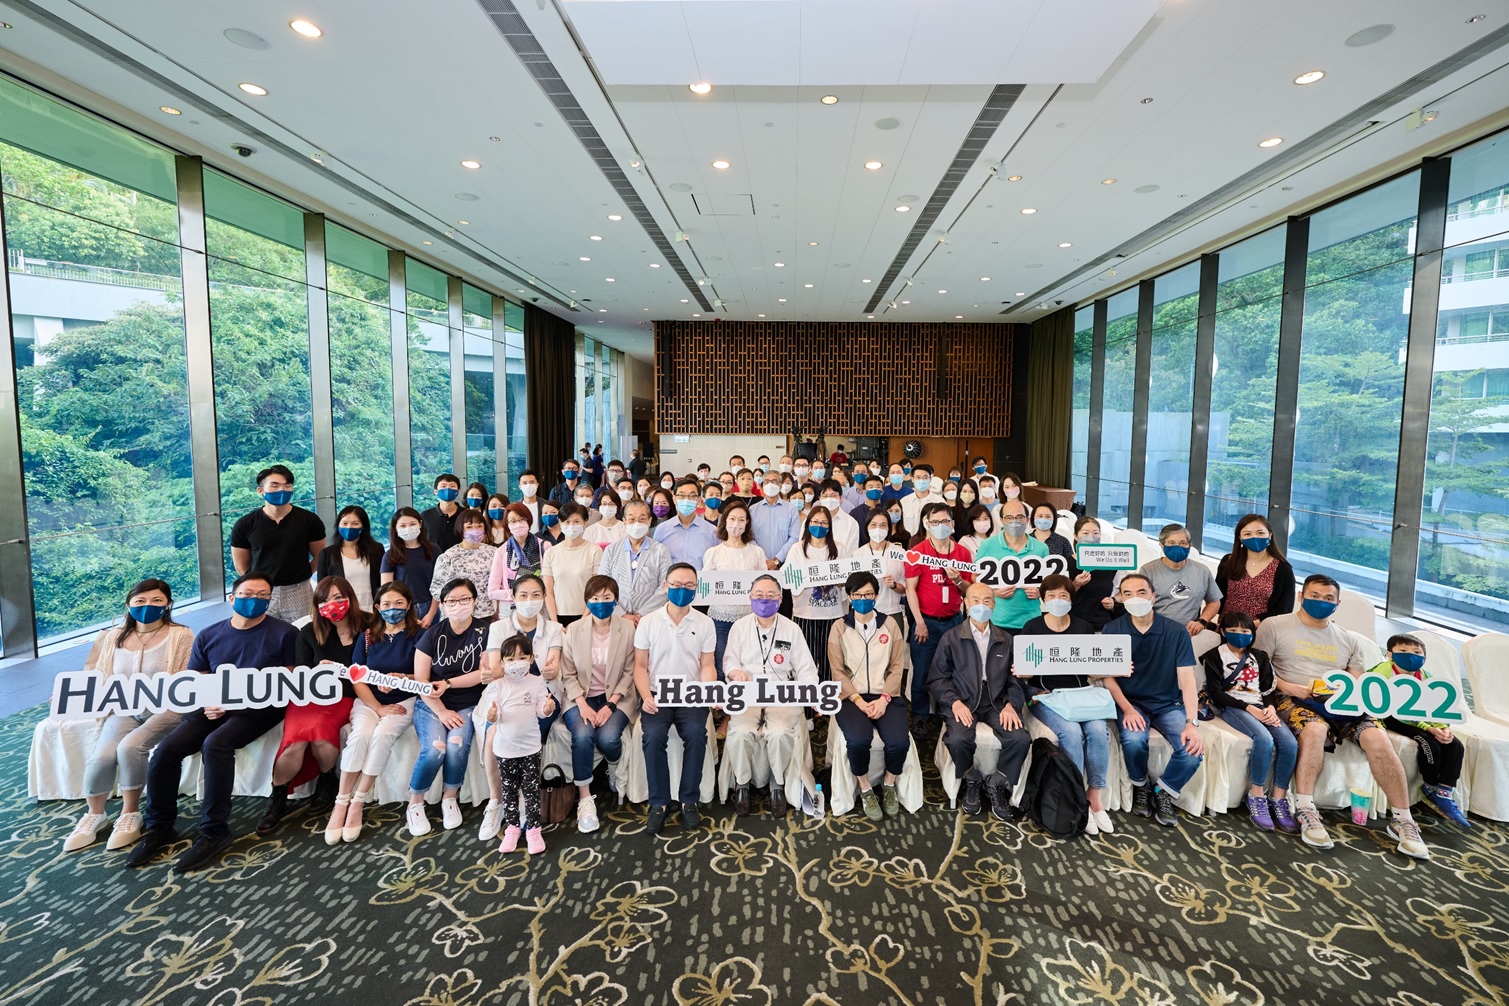 Mr. Ronnie C. Chan, Chair of Hang Lung Properties, takes photos with nearly a hundred employees and their families and friends at the sharing session